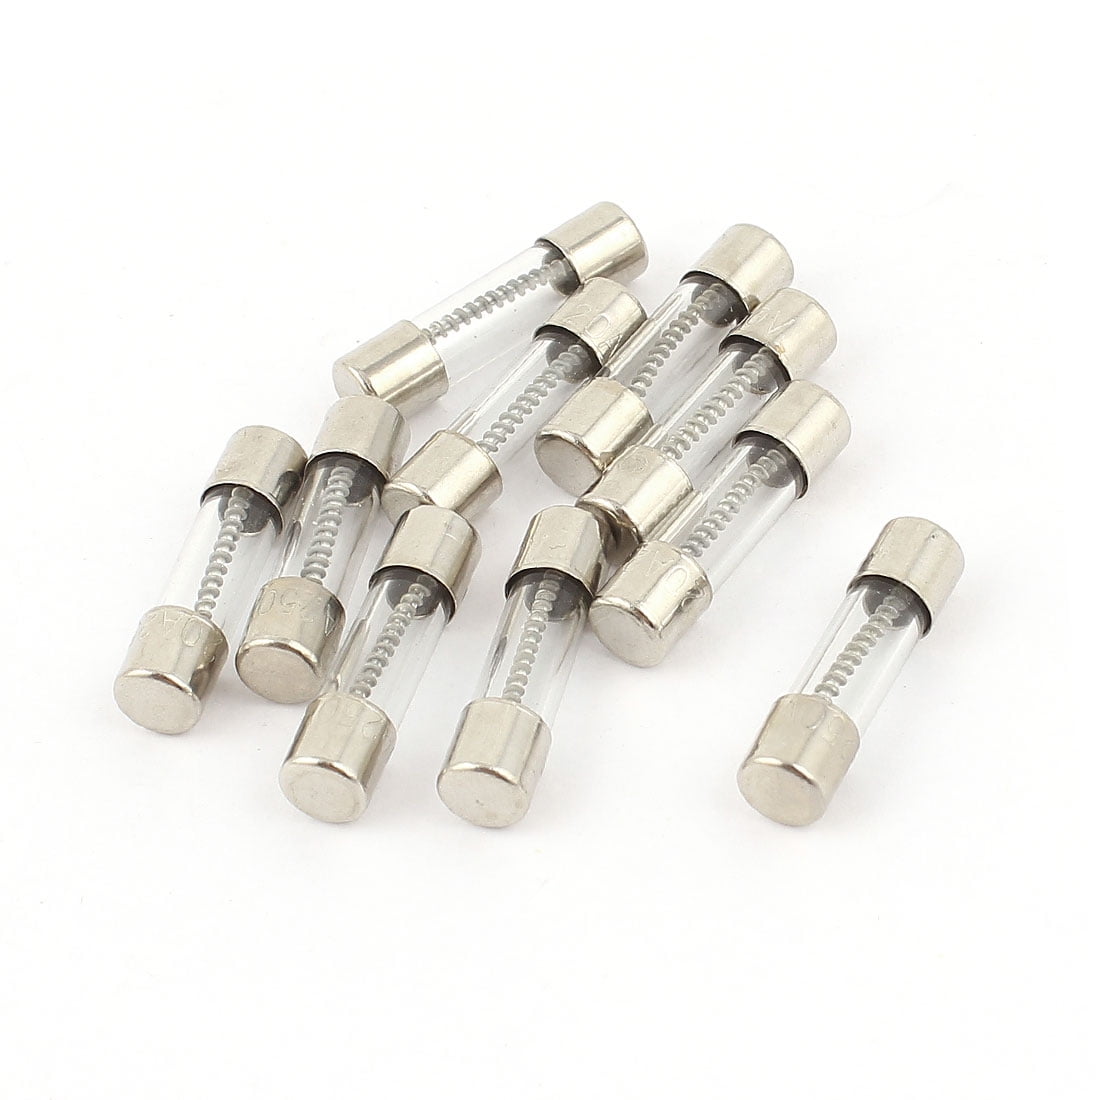 PACK OF 10 TIME DELAY SLOW BLOW GLASS FUSES 5X20MM 100MA 5A 10A 20A 